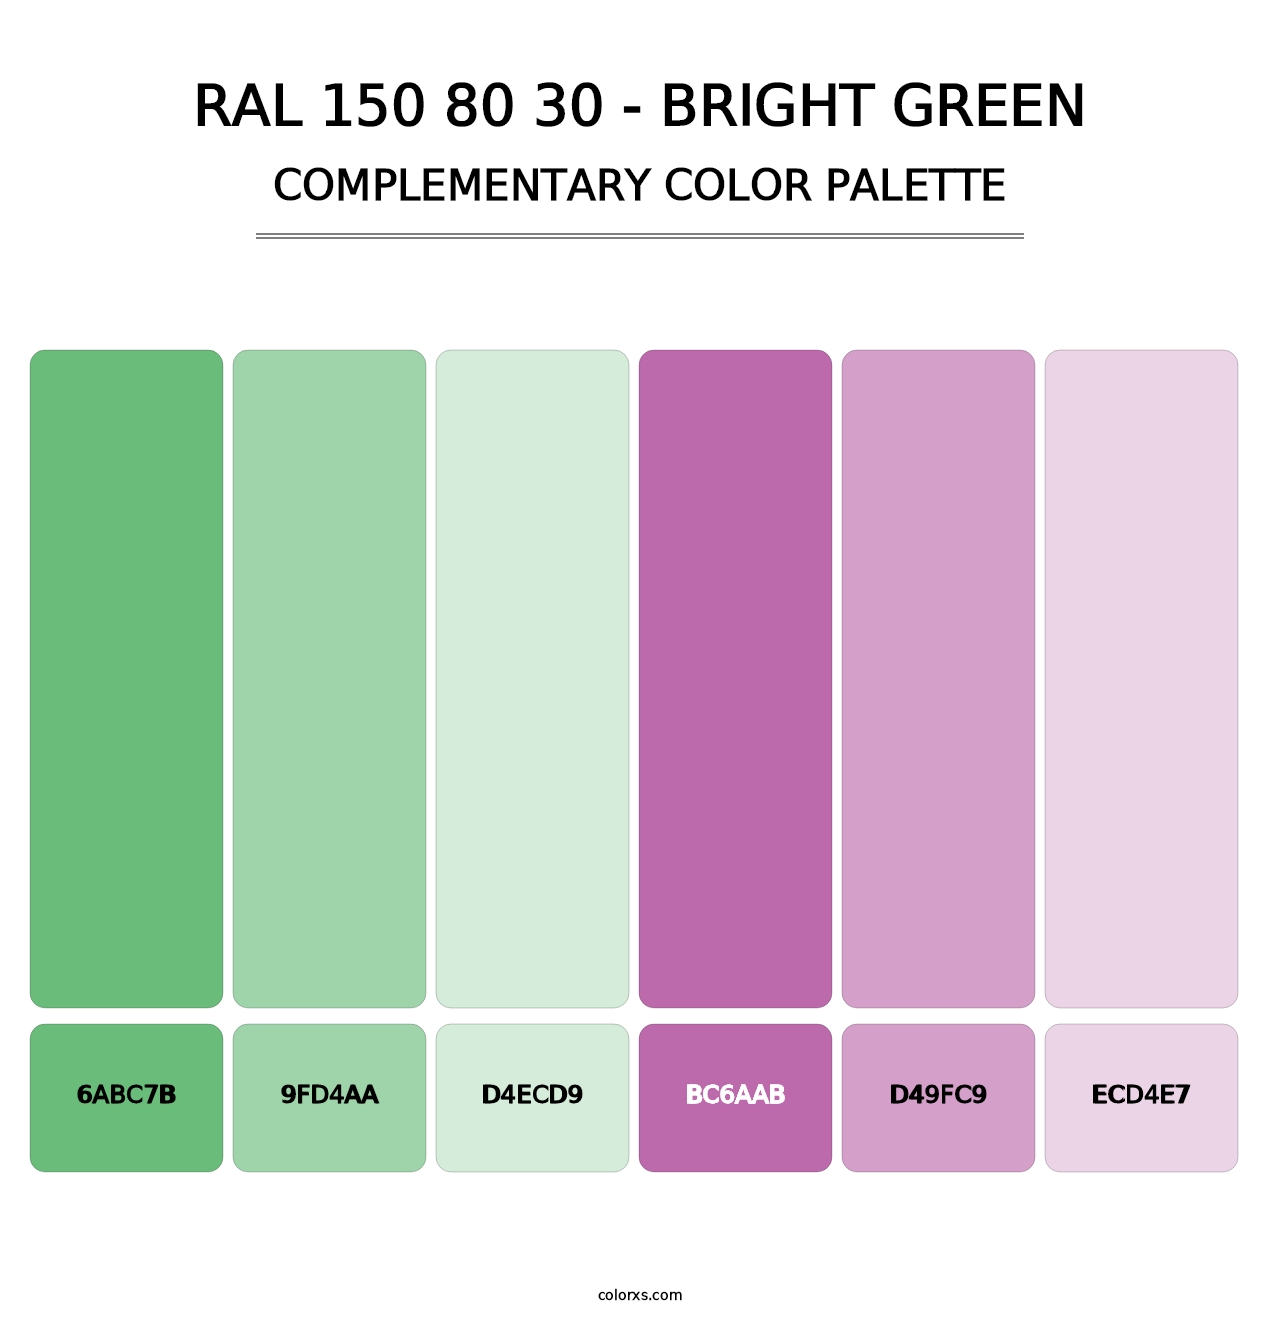 RAL 150 80 30 - Bright Green - Complementary Color Palette